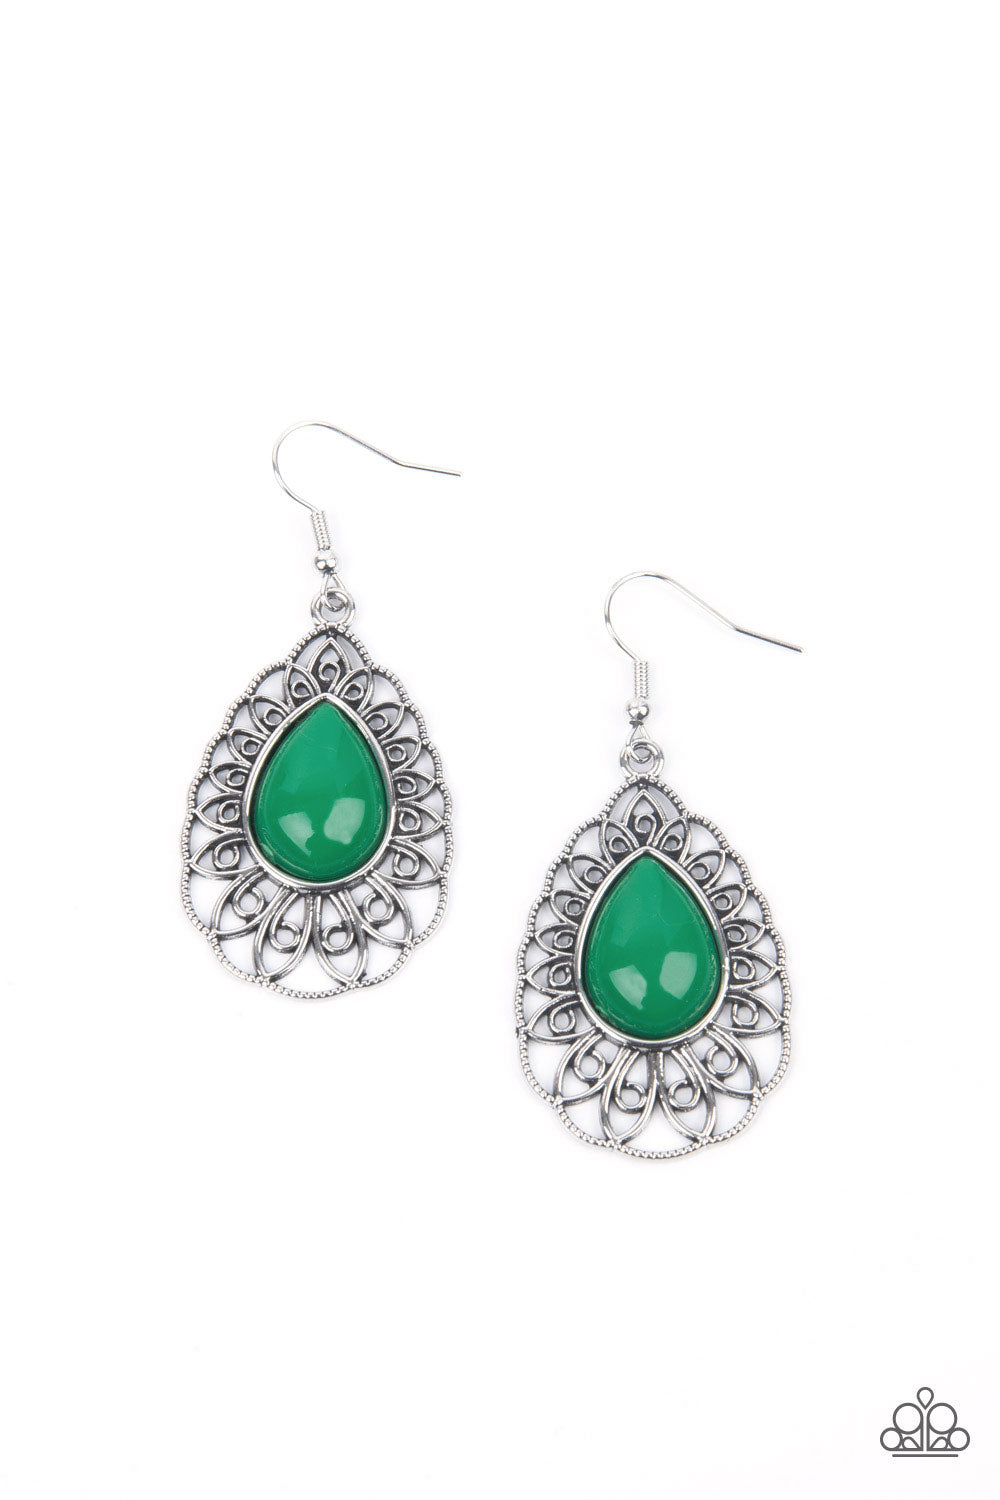 Dream STAYCATION Green Earring - Paparazzi Accessories A shiny Mint teardrop bead is pressed into the center of an airy silver teardrop frame radiating with ornate petals for a whimsical finesse. Earring attaches to a standard fishhook fitting.  All Paparazzi Accessories are lead free and nickel free!  Sold as one pair of earrings.